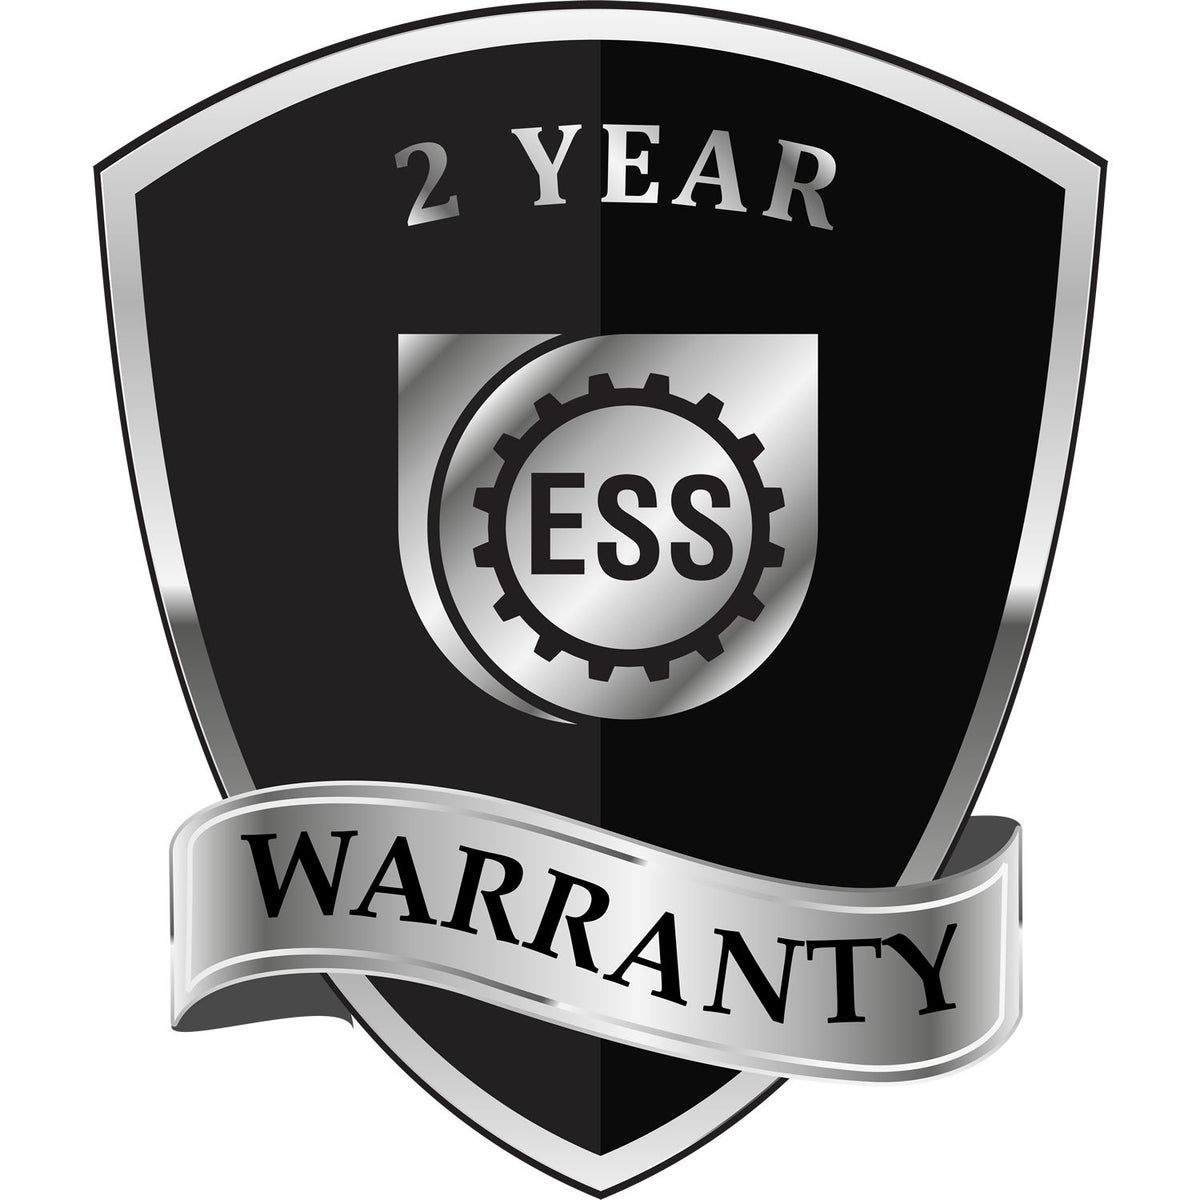 A black and silver badge or emblem showing warranty information for the Hybrid Oklahoma Architect Seal